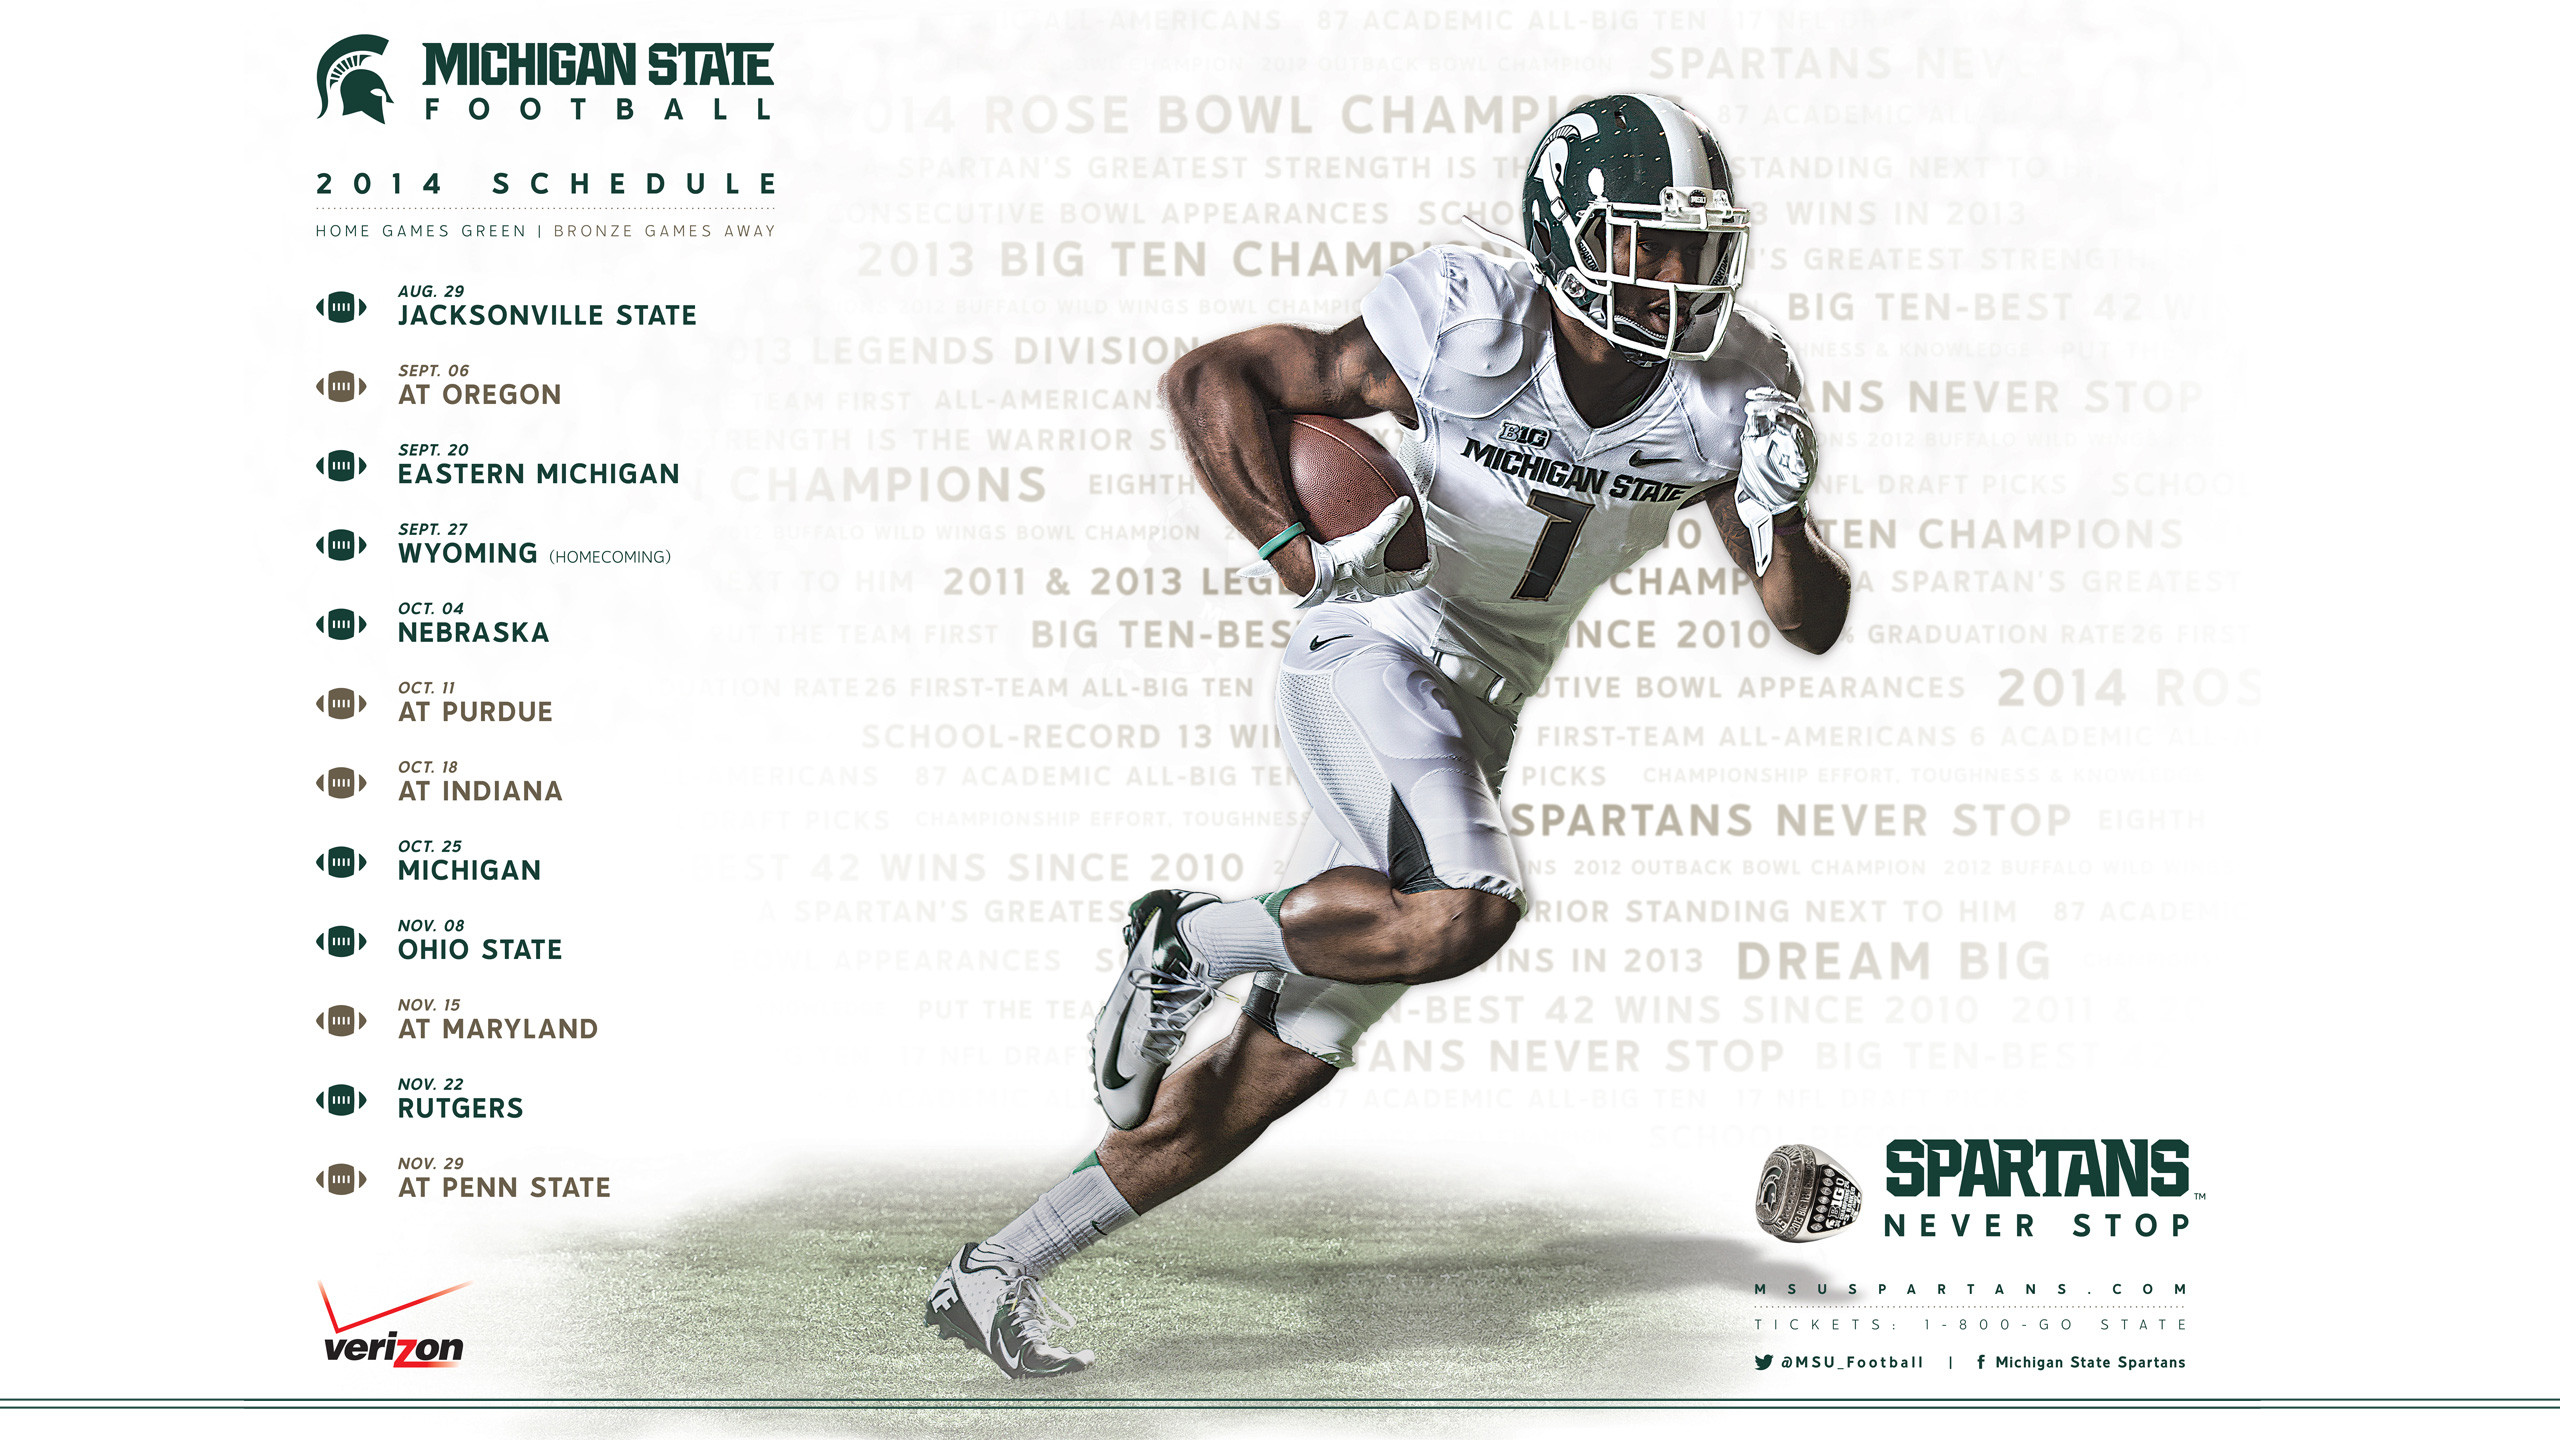 College Football Browser Themes & Desktop Wallpapers - Michigan State Football Background 2019 - HD Wallpaper 